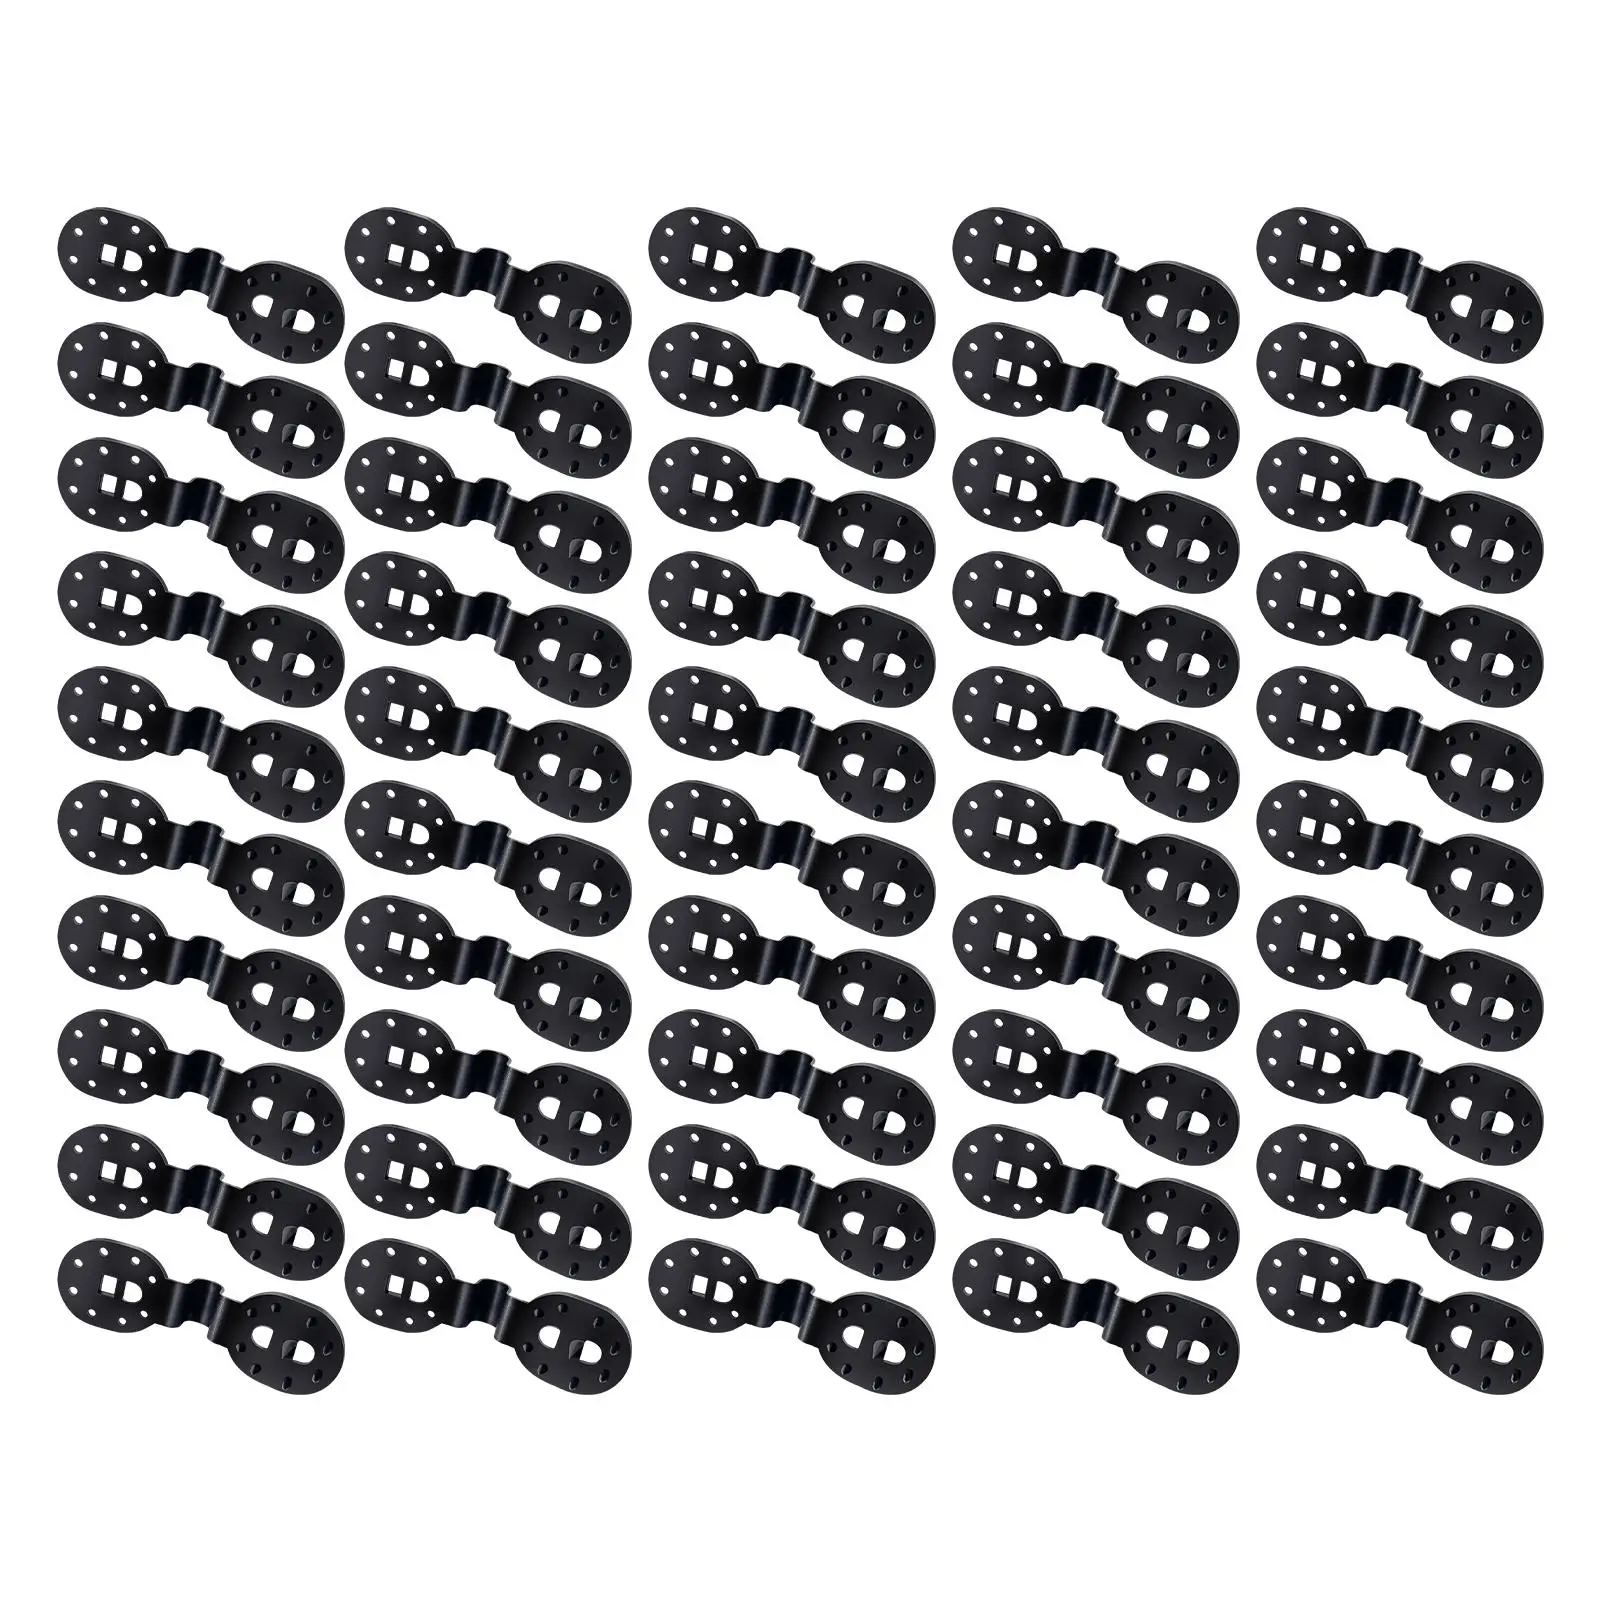 50 Pieces Shade Cloth Clips Shade Net Clips for Boat Cover Sun Shade Net